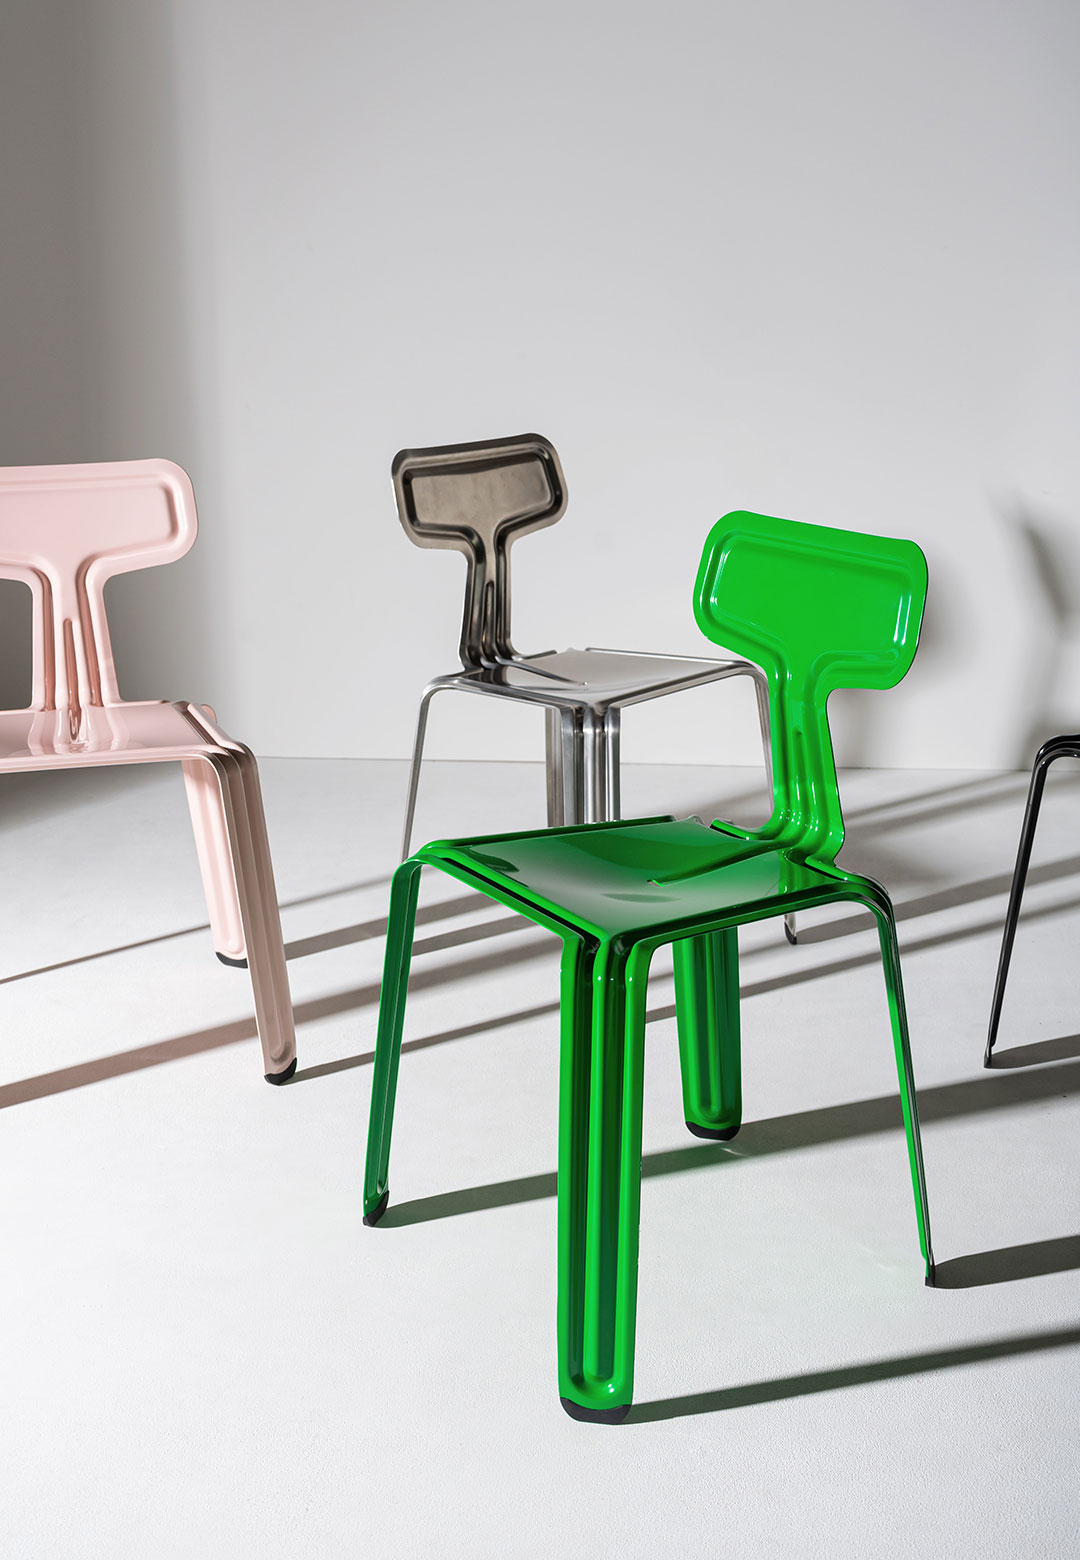 Nils Holger Moormann launches special-edition Pressed Chairs